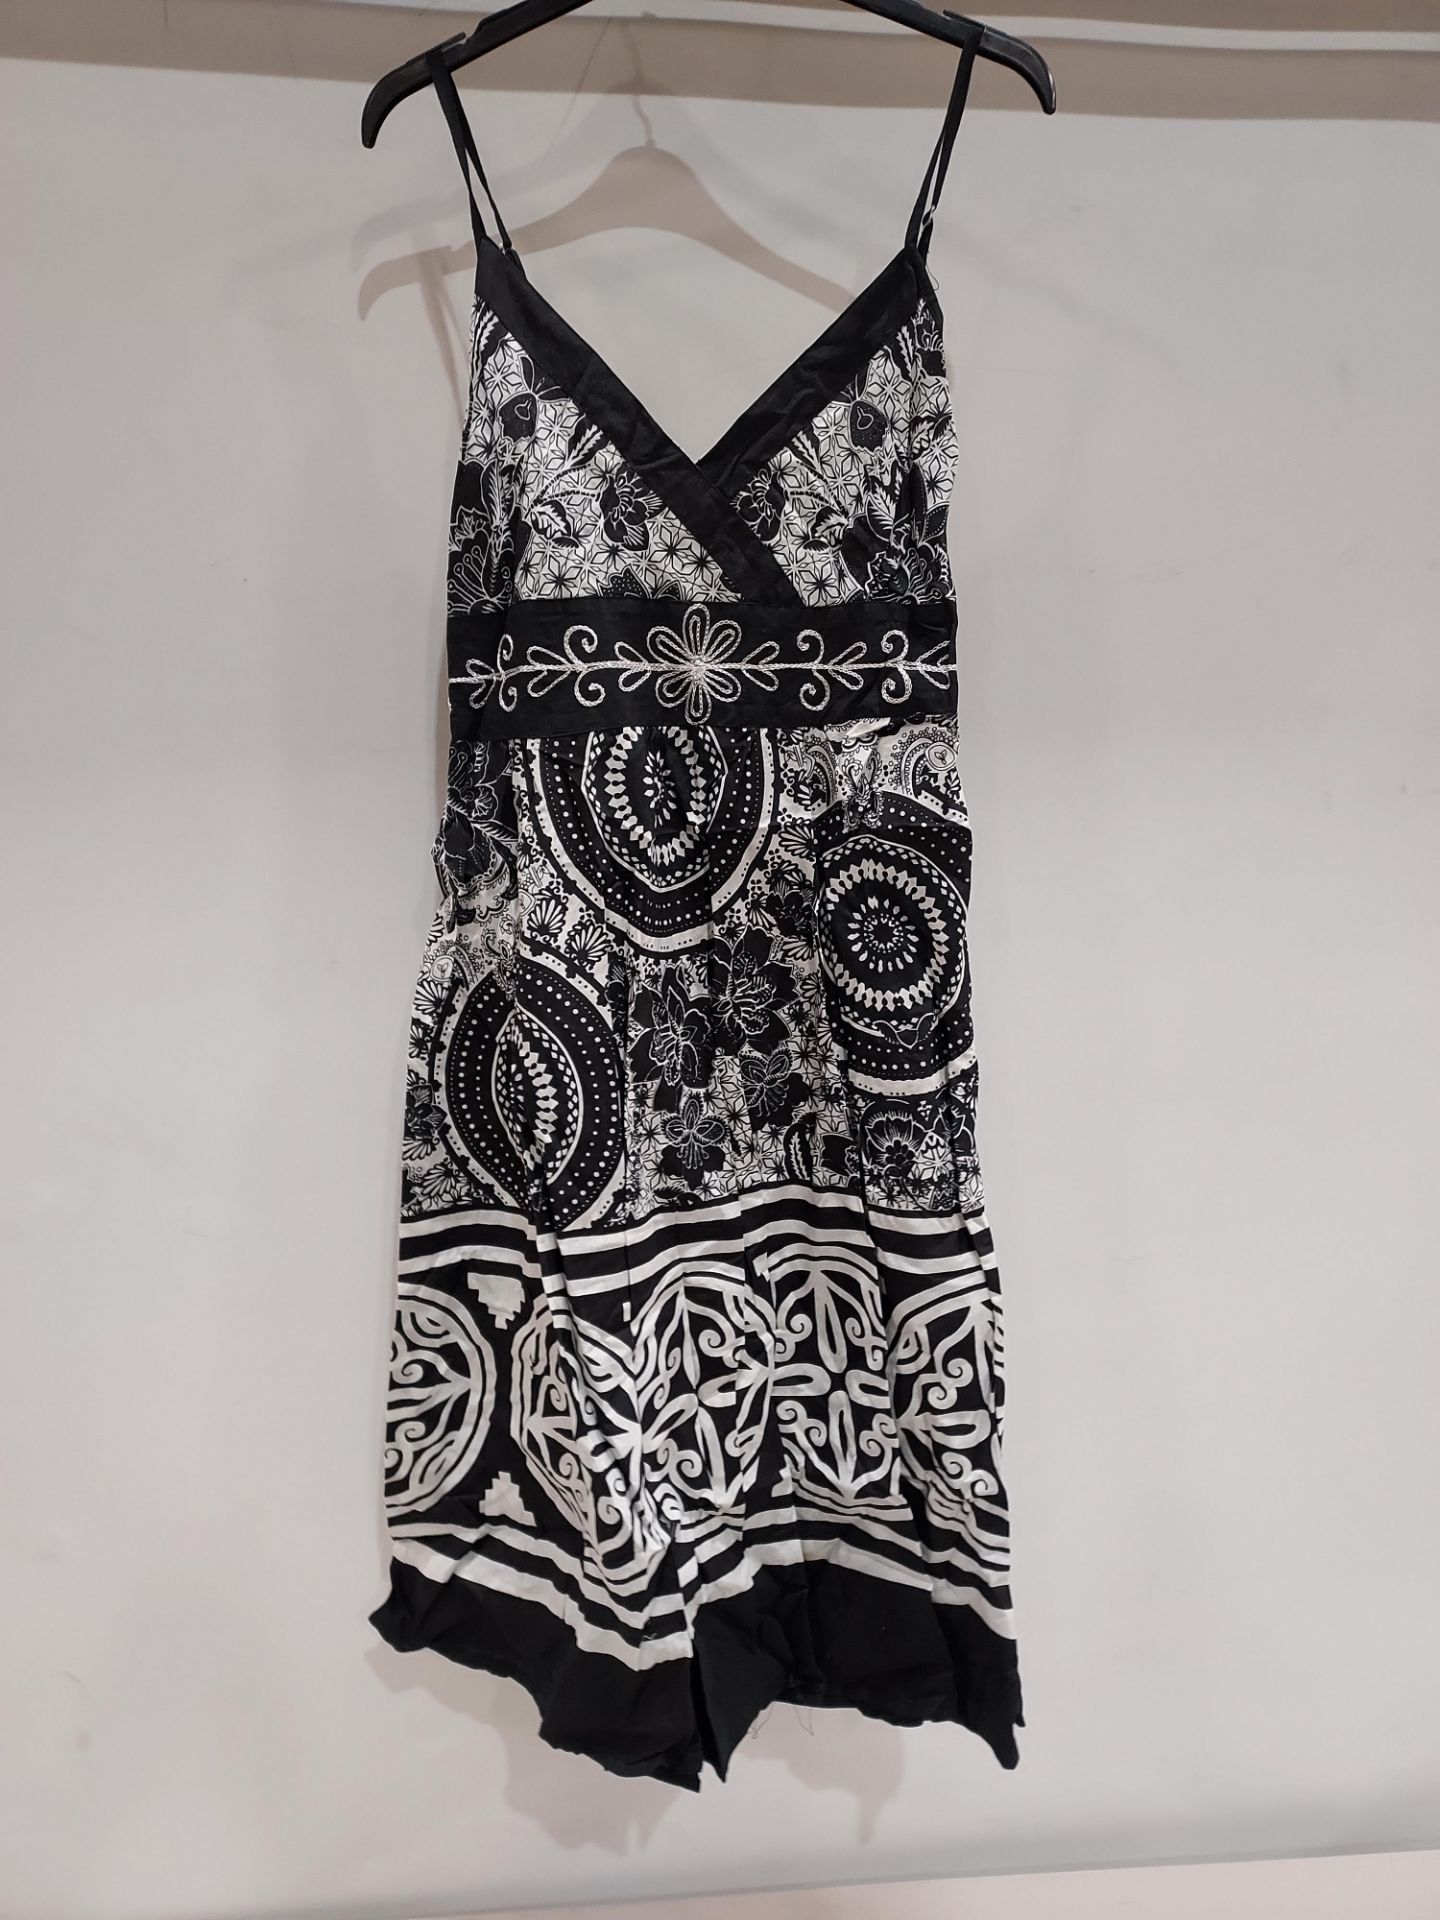 12 X BRAND NEW PISTACHIO SUMMER DRESSES IN BLACK/WHITE SIZE SMALL (RRP EACH £25 TOTAL RRP £300)